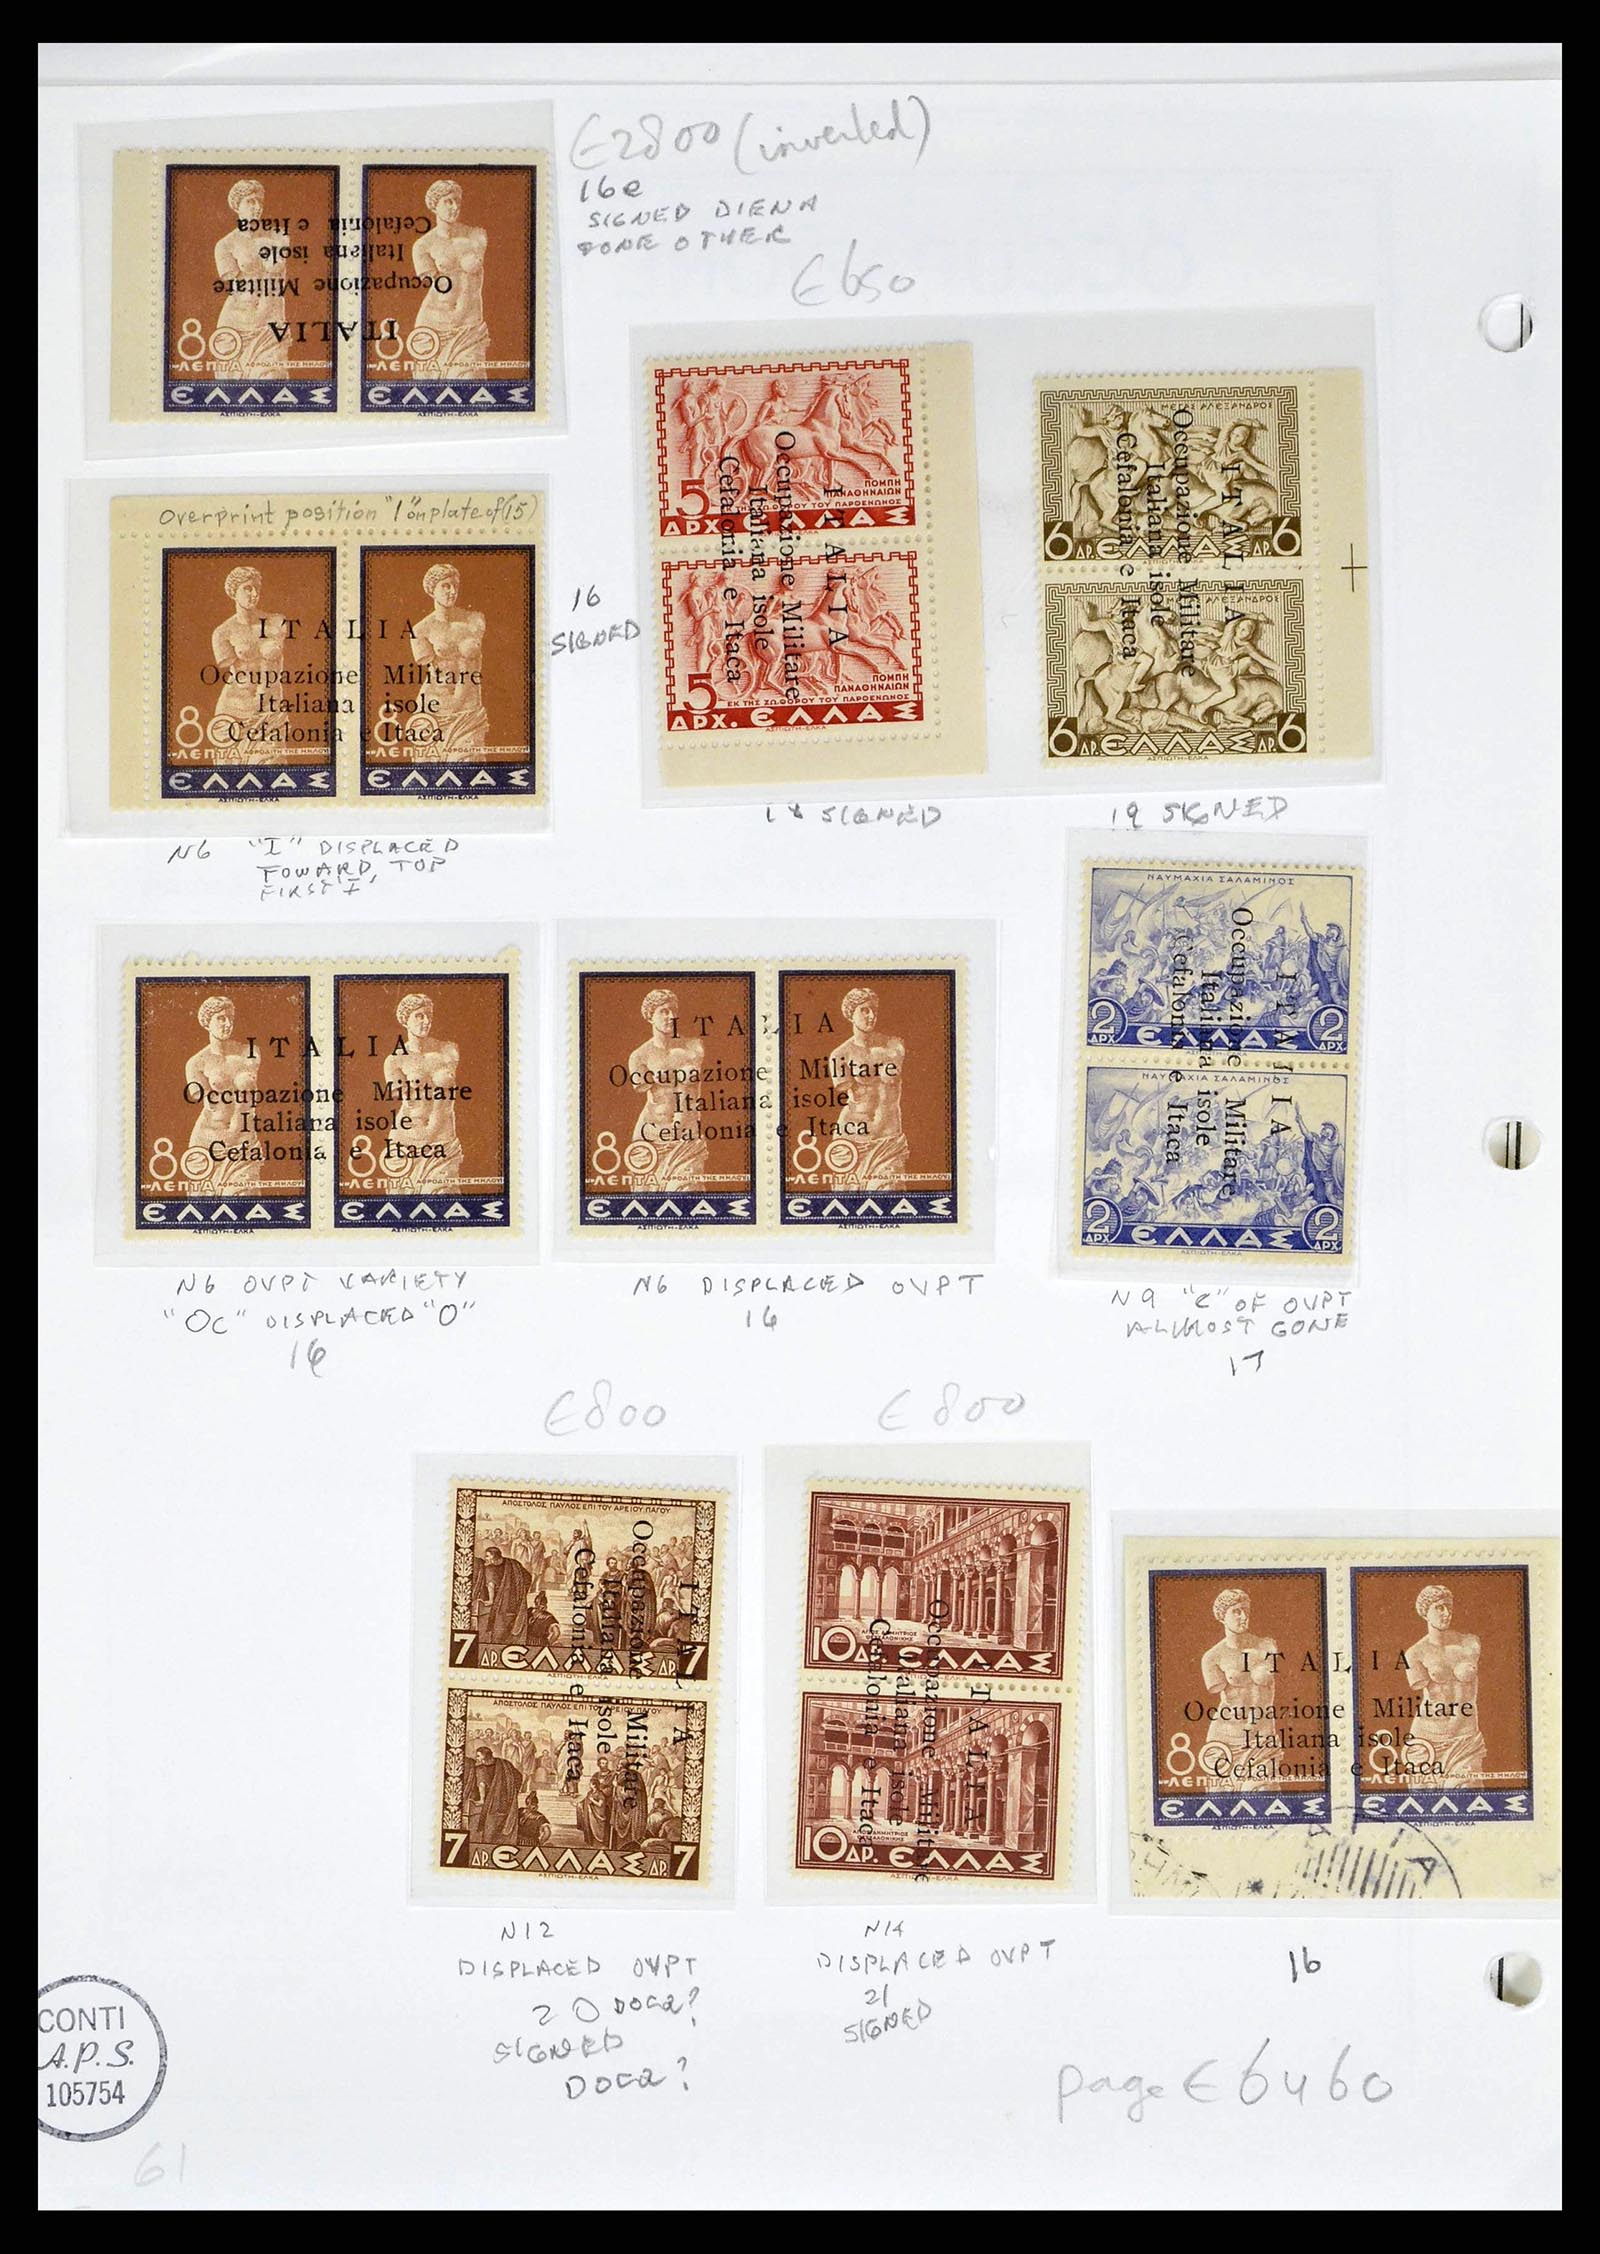 38990 0008 - Stamp collection 38990 Italian occupation Cefalonia and Itaca 1941.